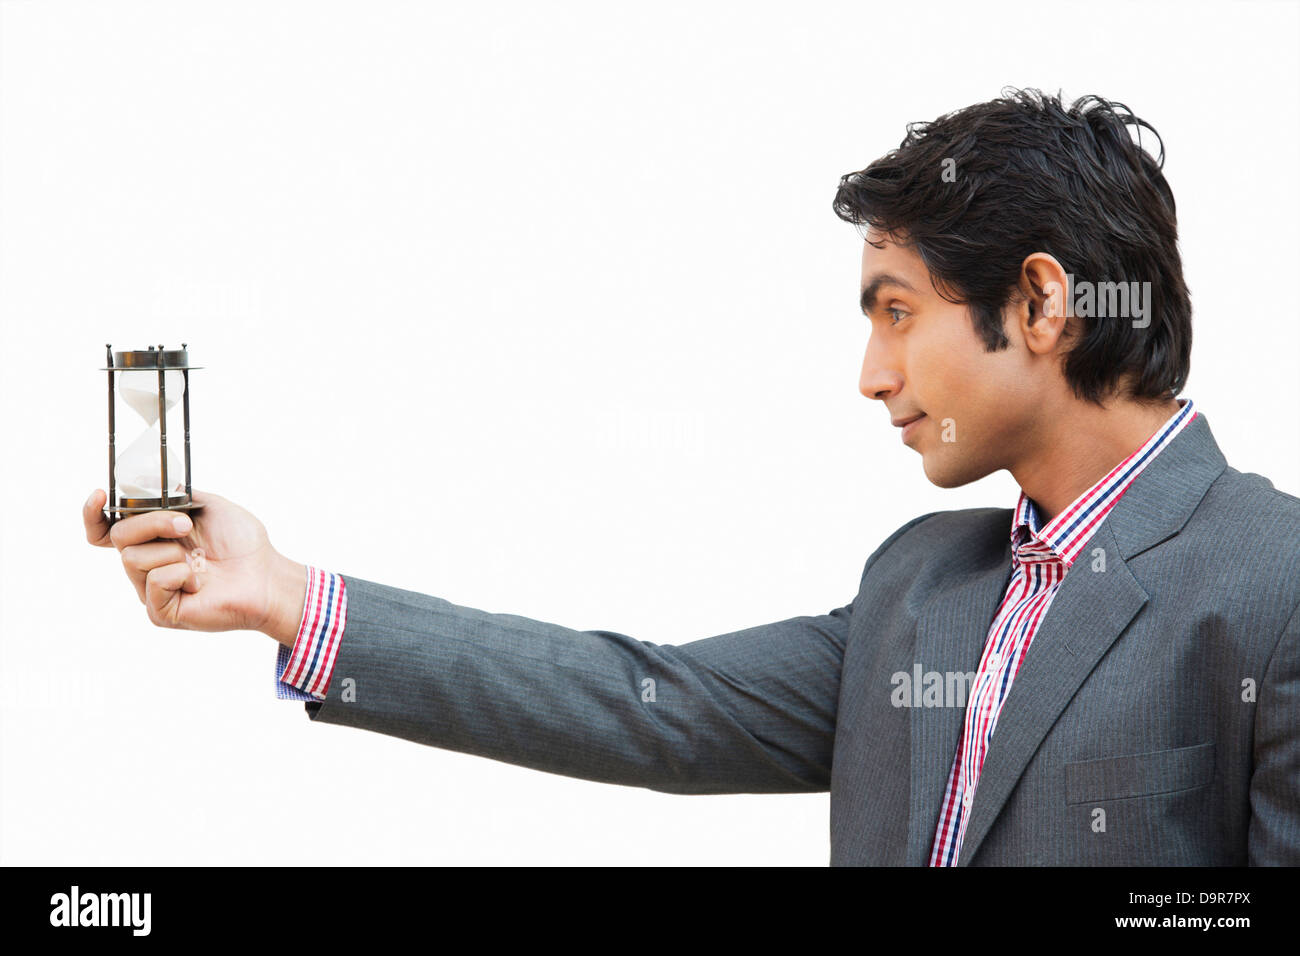 Businessman looking at an hourglass Stock Photo